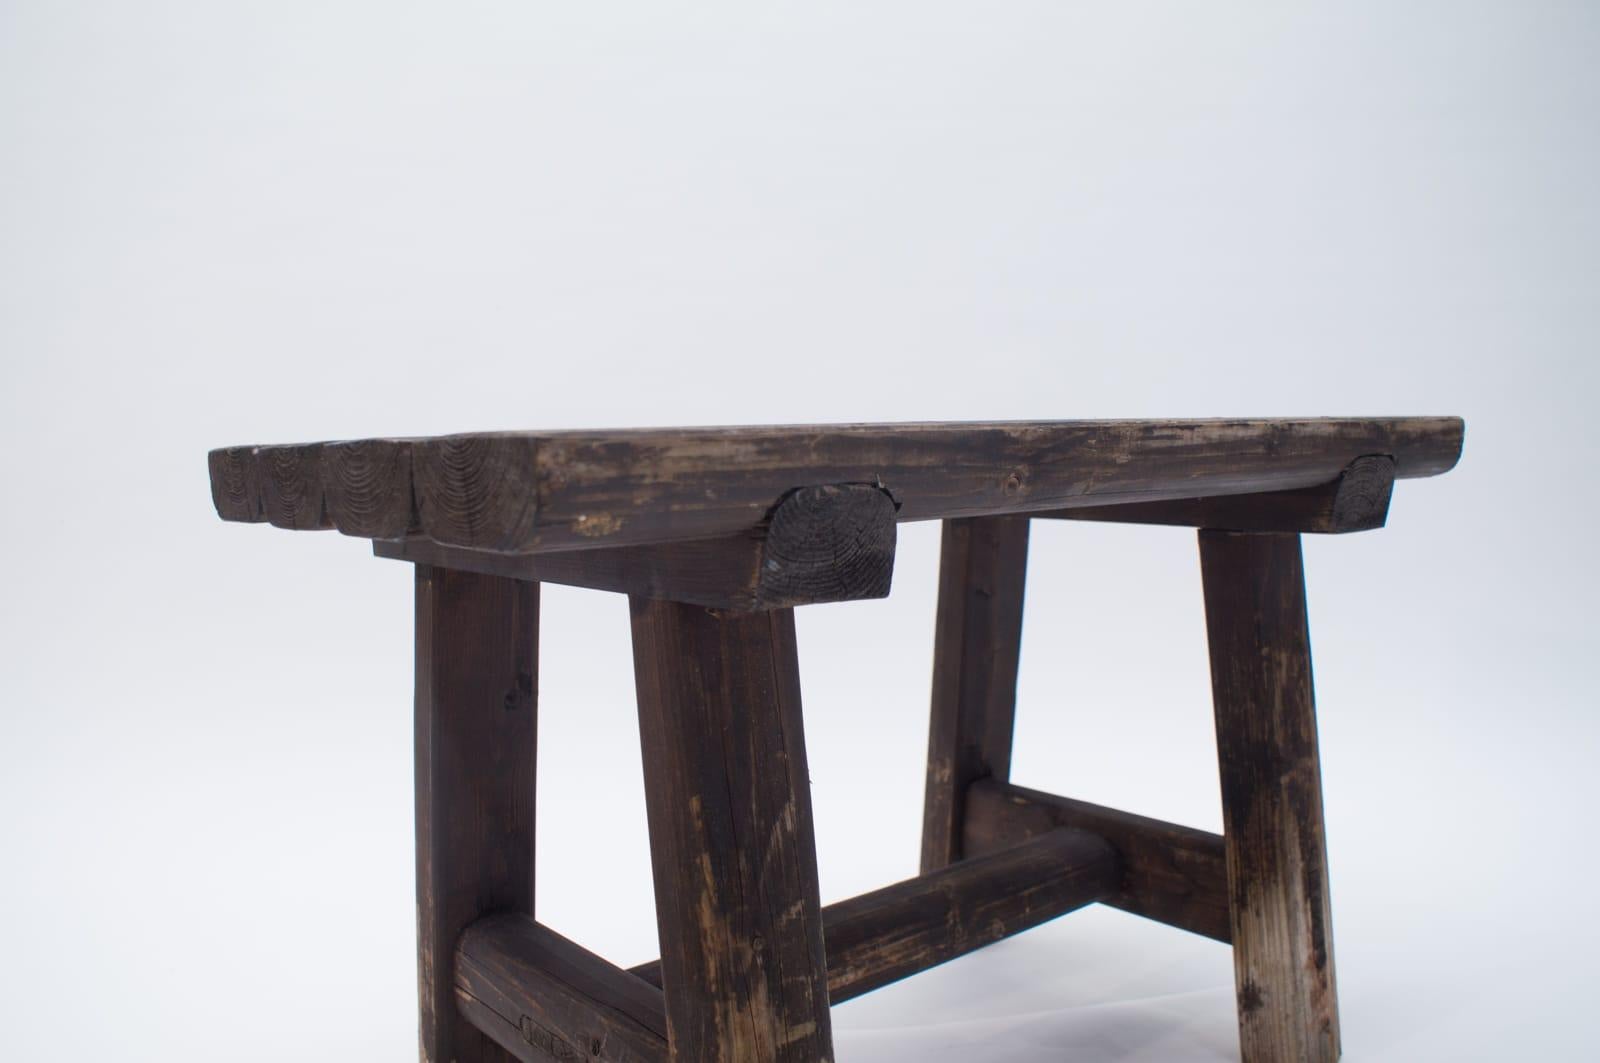 Black Forest Wooden Bench, 1930s-1940s Germany 4